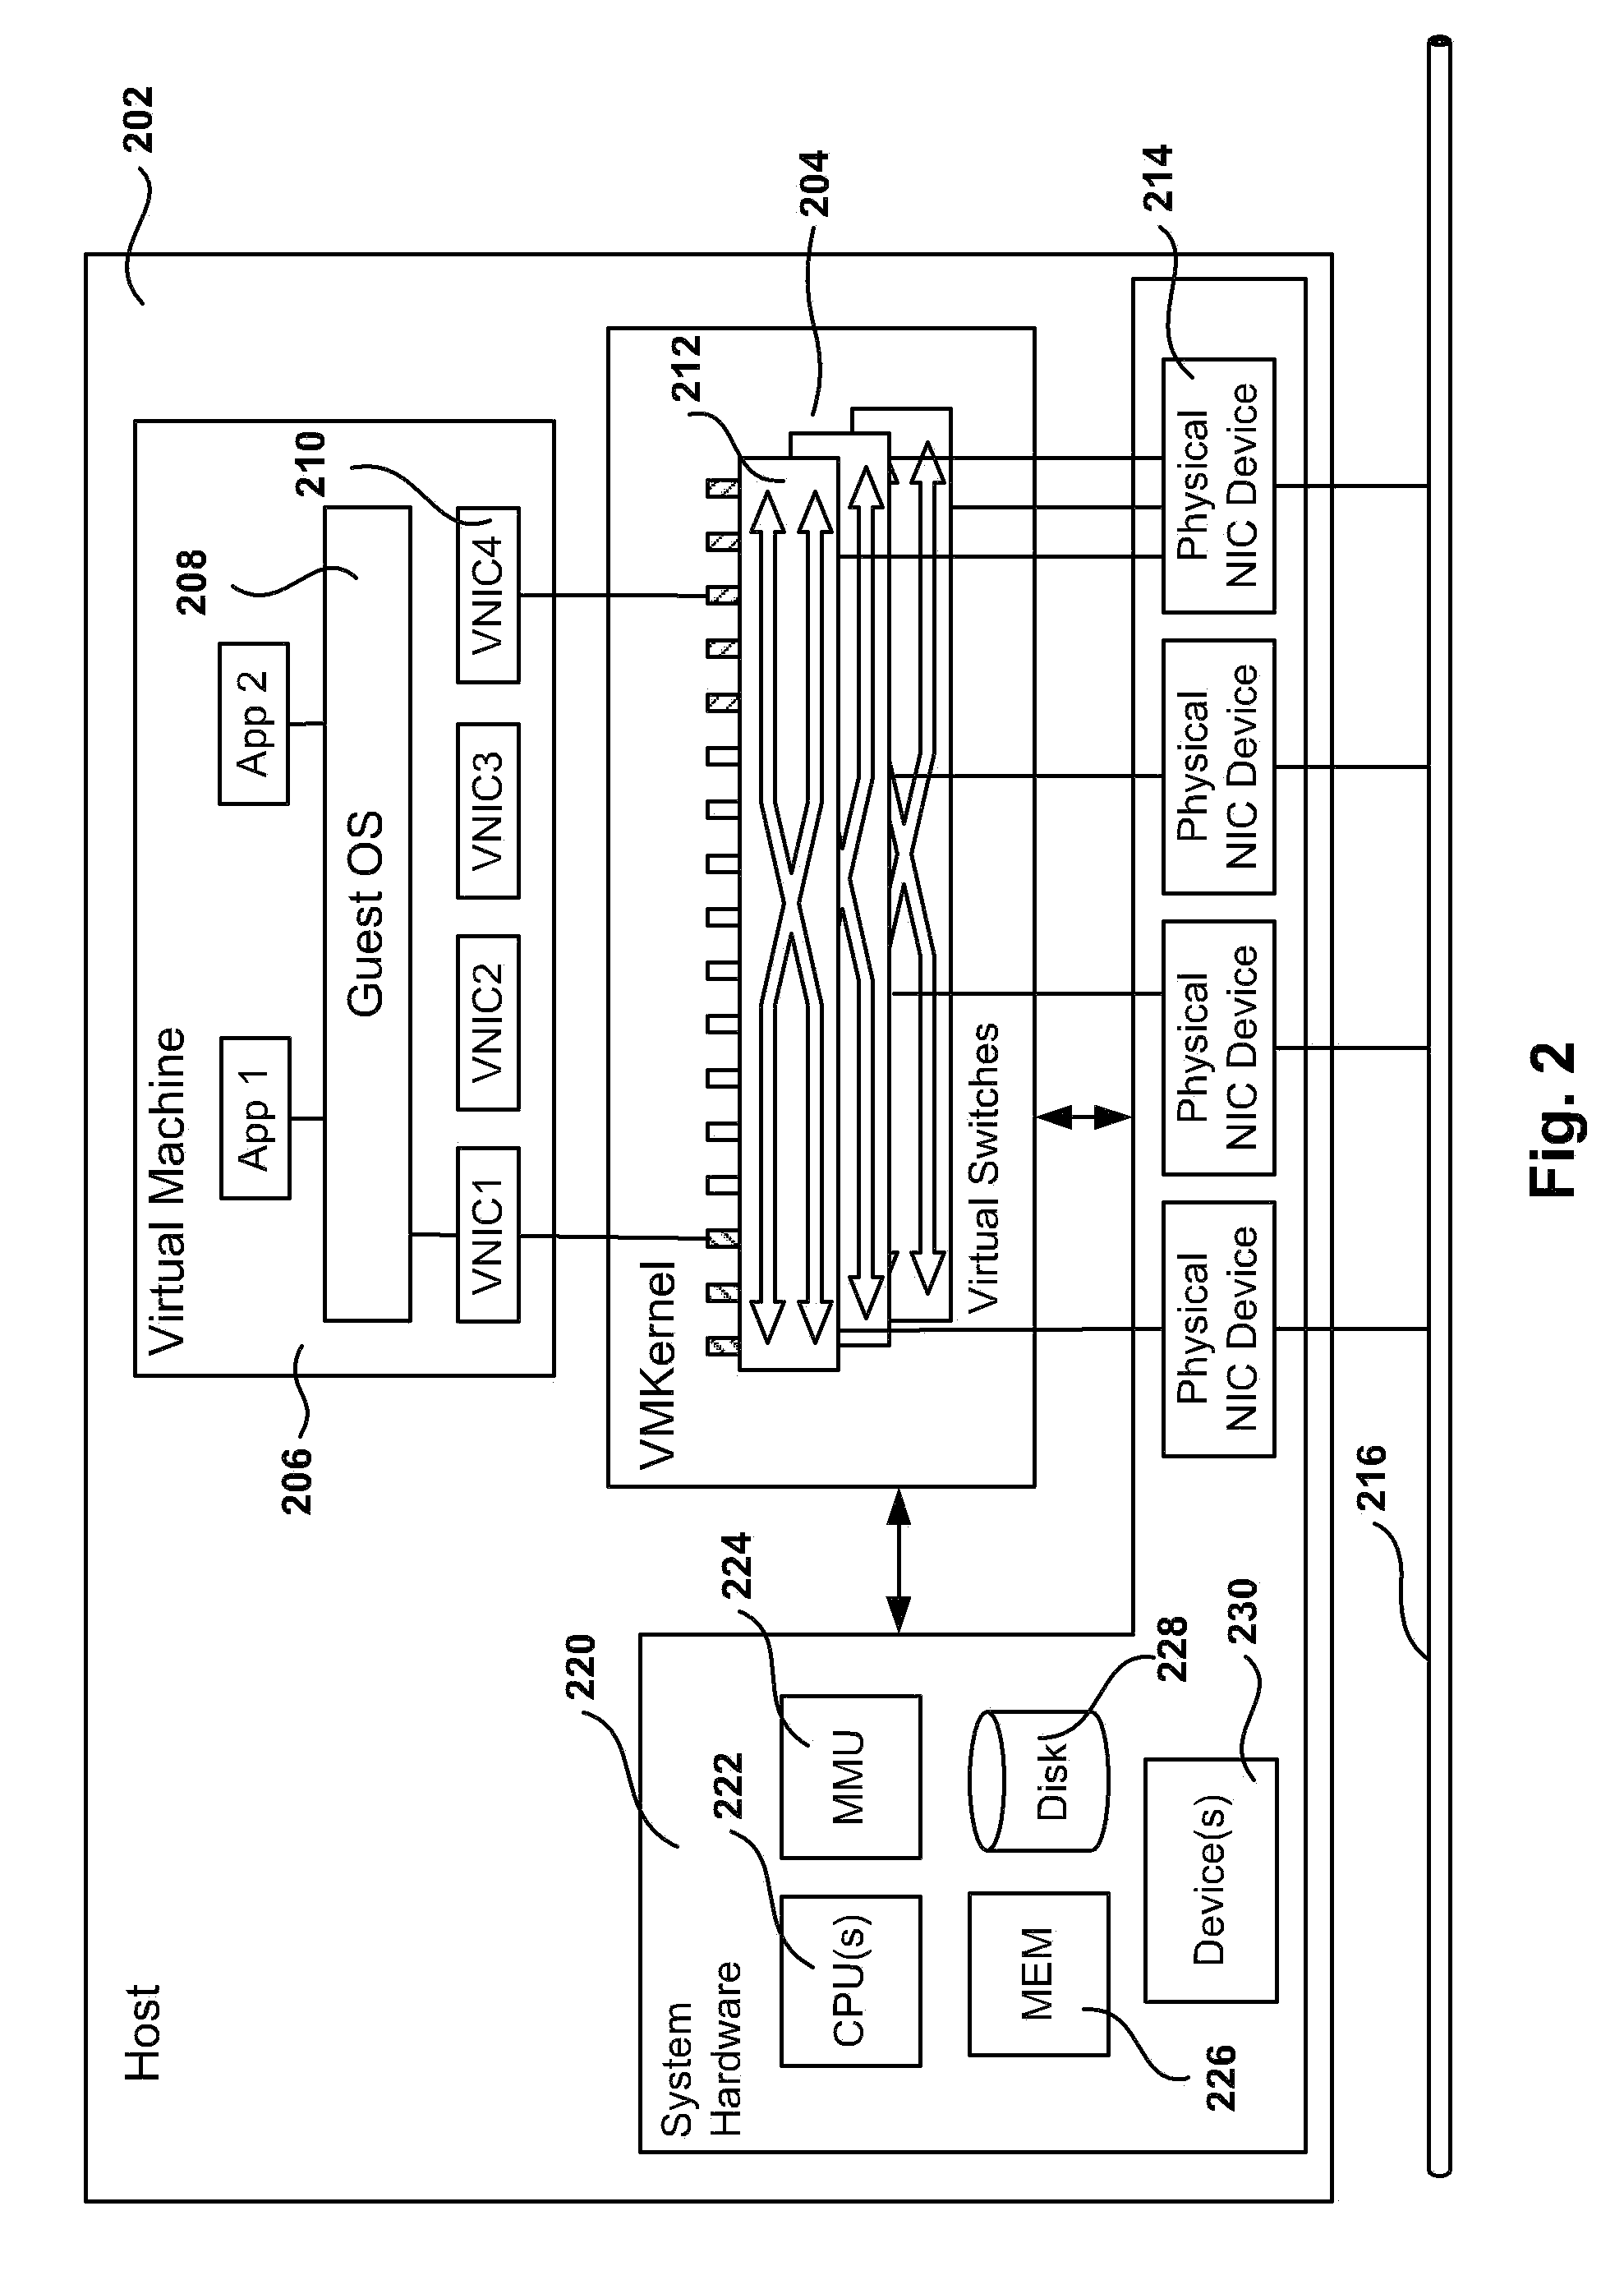 Private ethernet overlay networks over a shared ethernet in a virtual environment